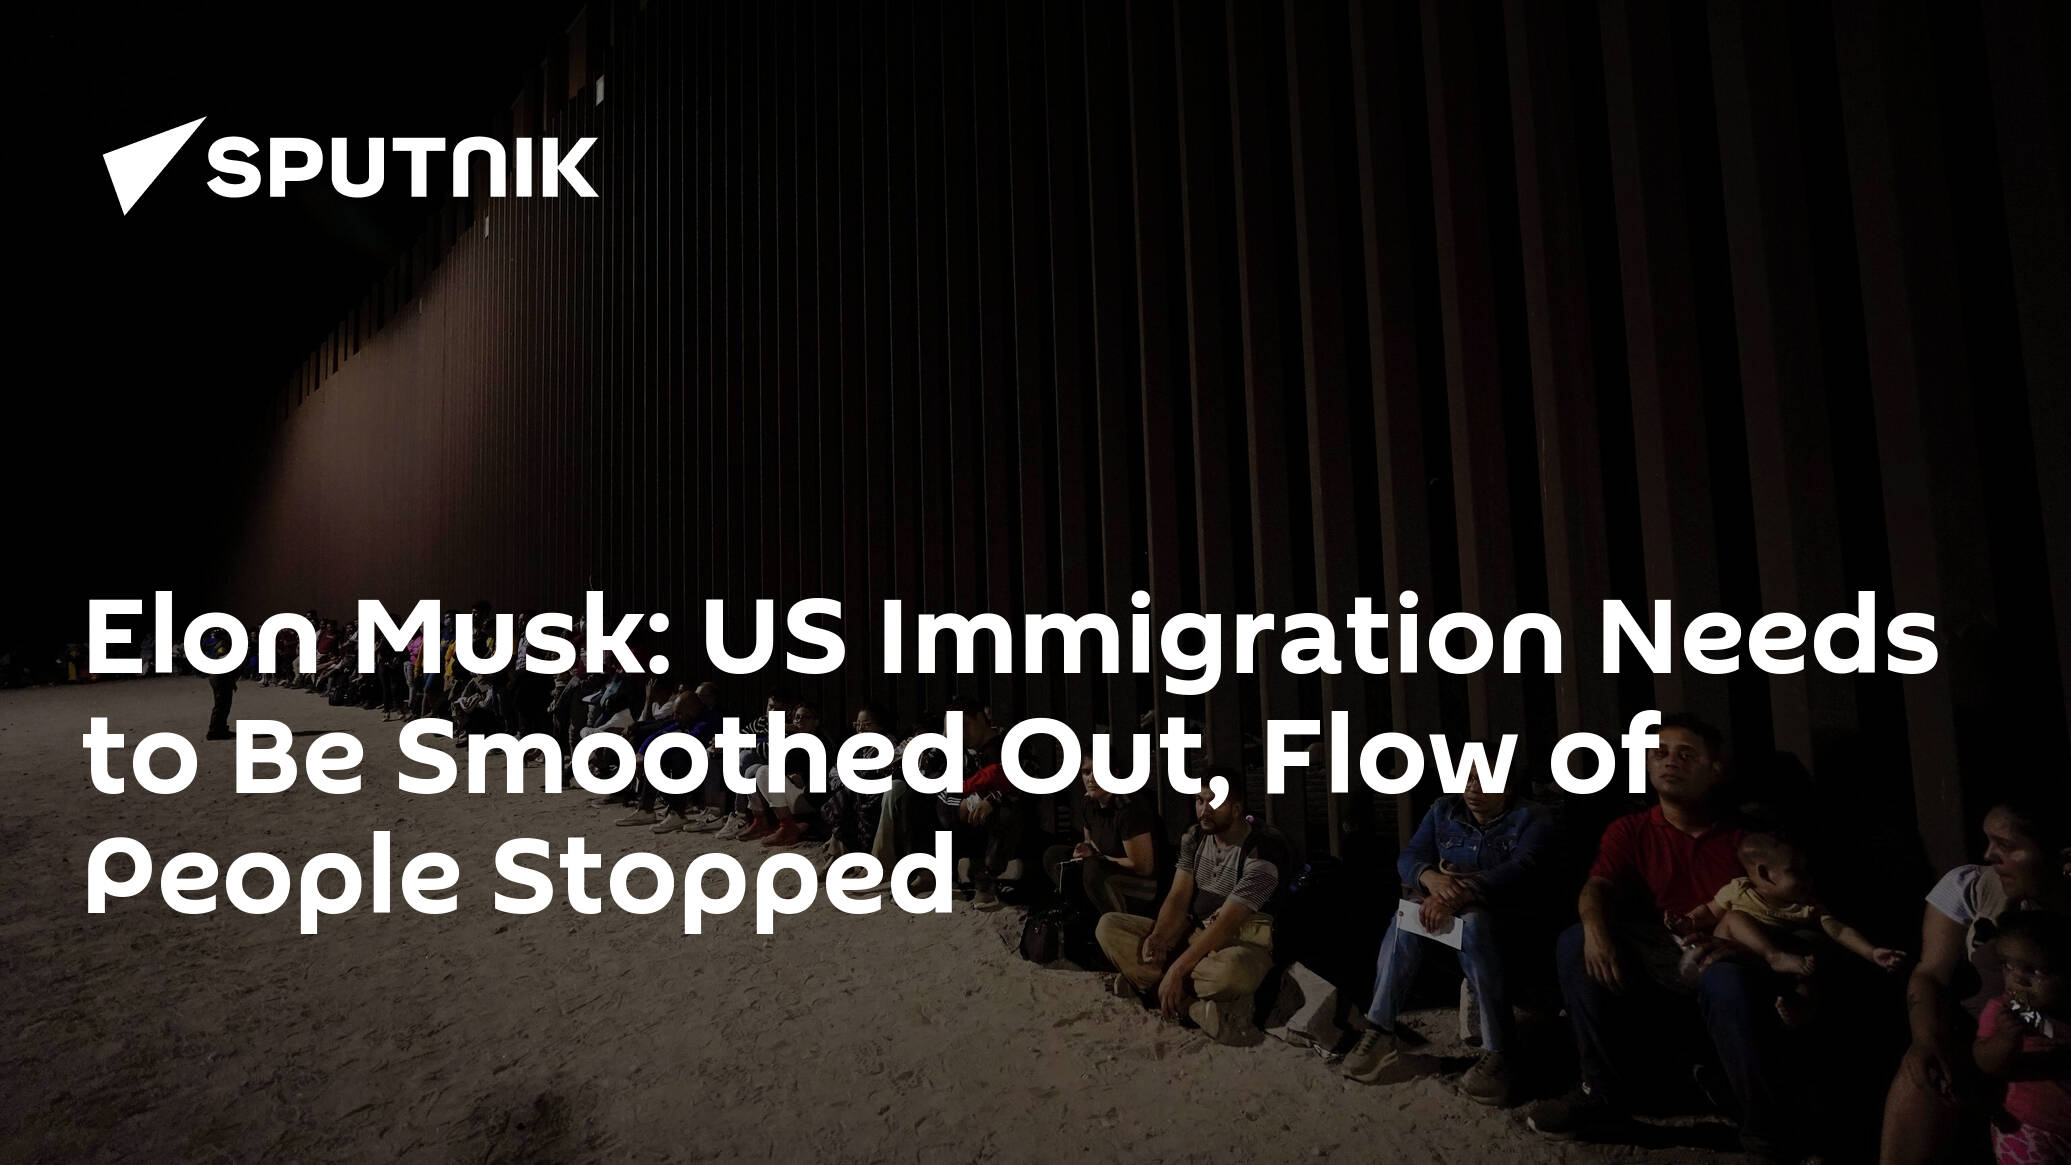 Elon Musk: US Immigration Needs to Be Smoothed Out, Flow of People Stopped